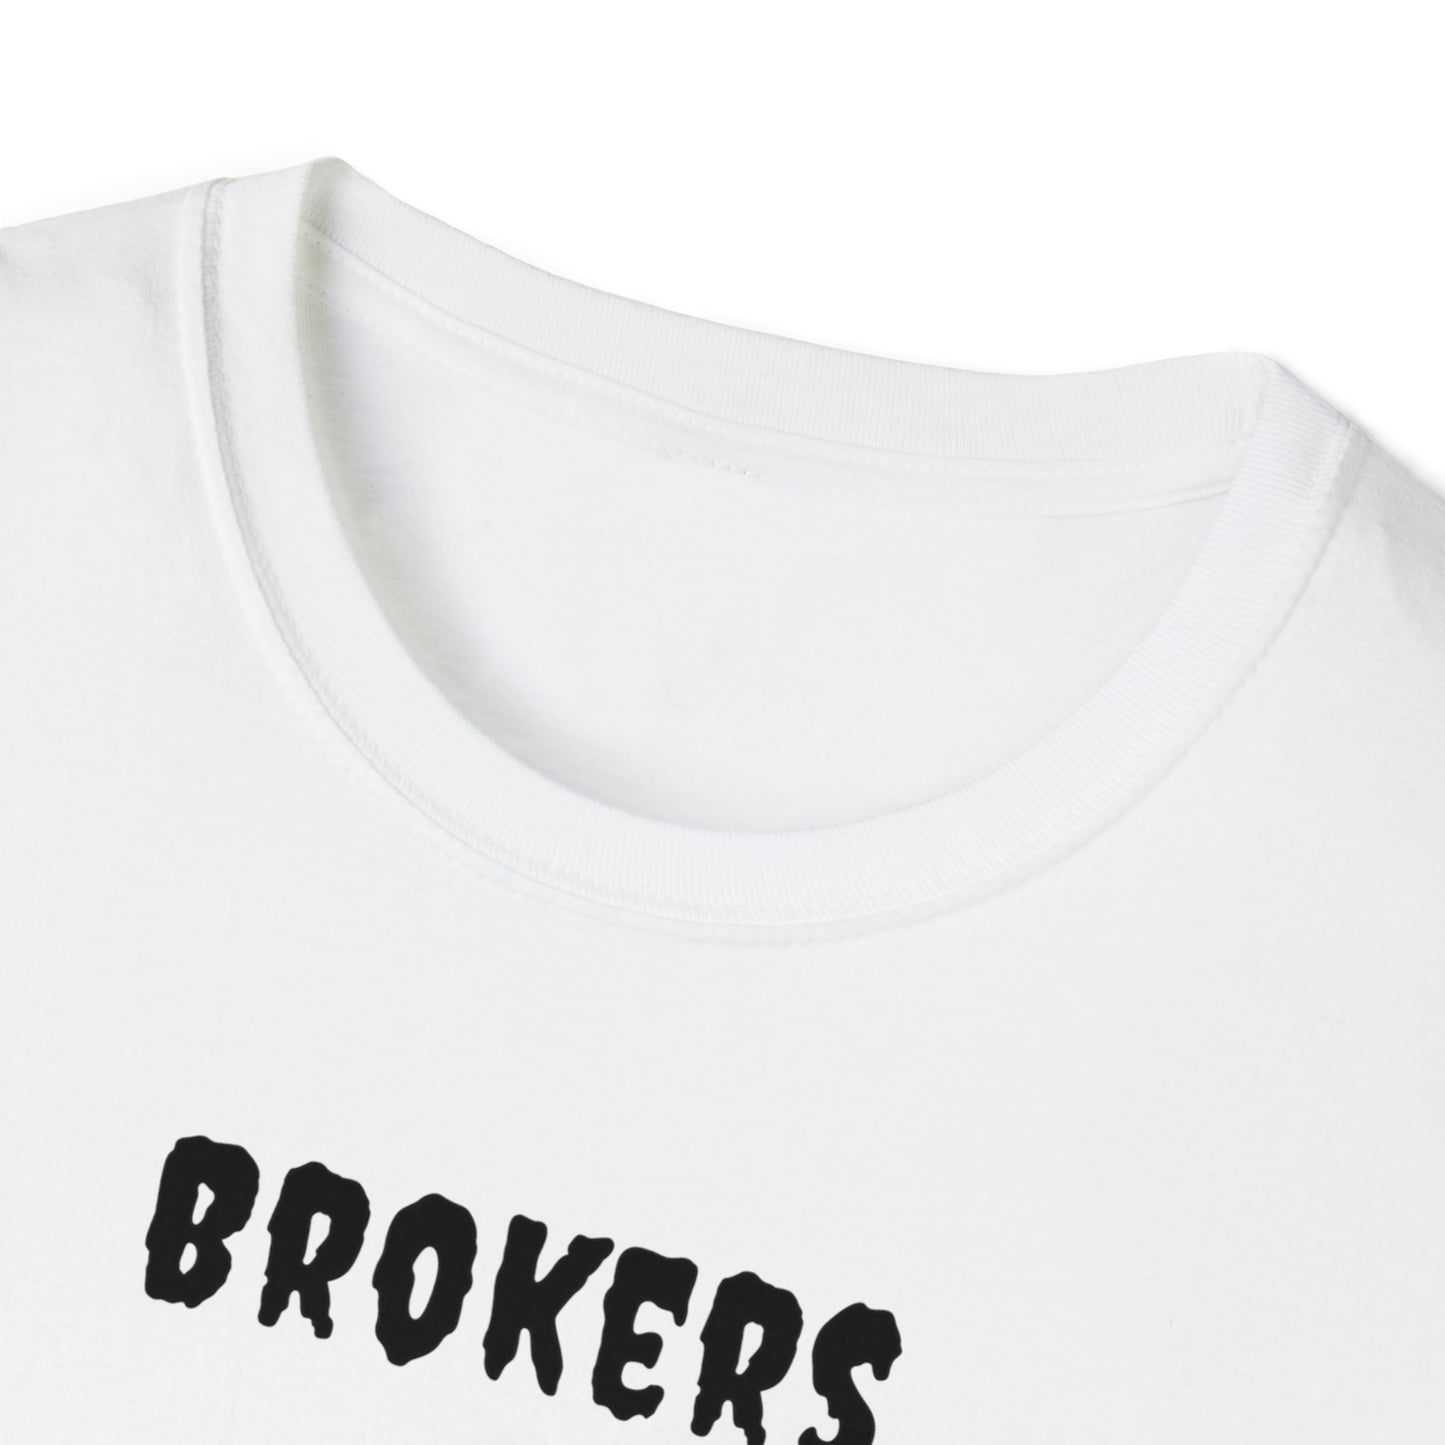 Brokers & BOO's Softstyle T-Shirt